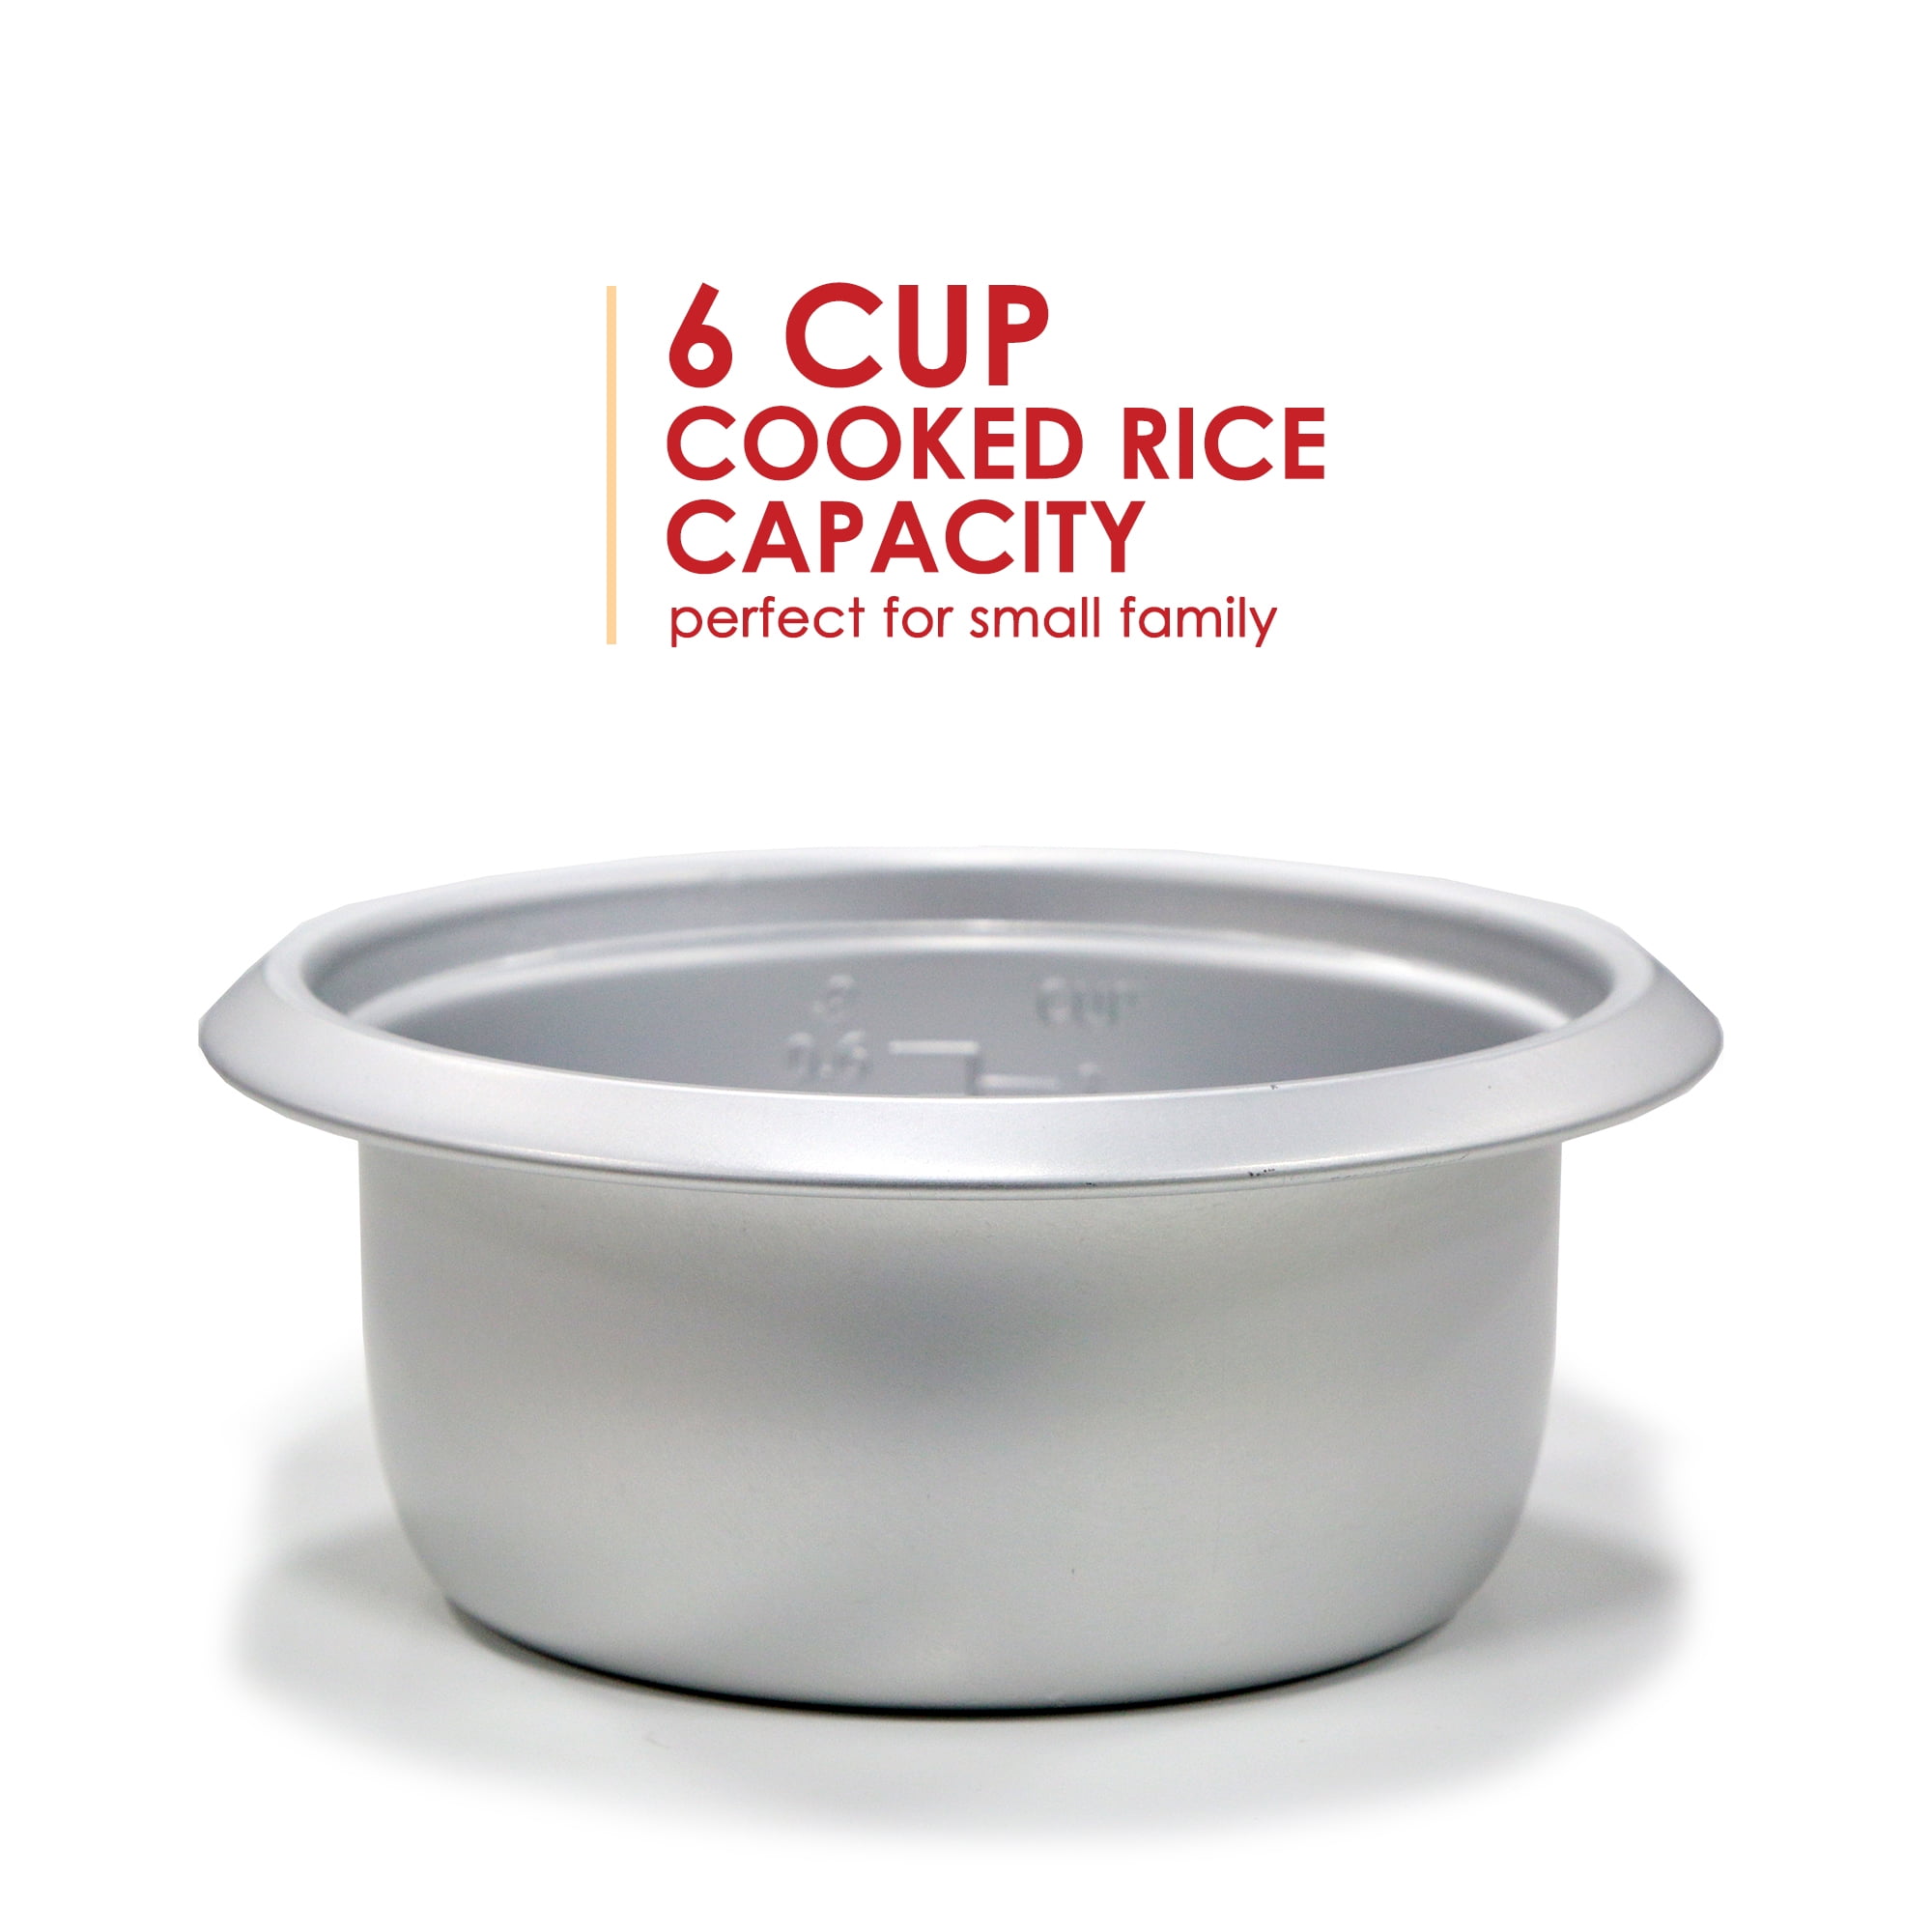 Cook with Color 6 Cup Rice Cooker 300W - Effortless Cooking and Perfectly, Cooks 3 Cups of Raw Rice for 6 Cups of Cooked Rice, Grey